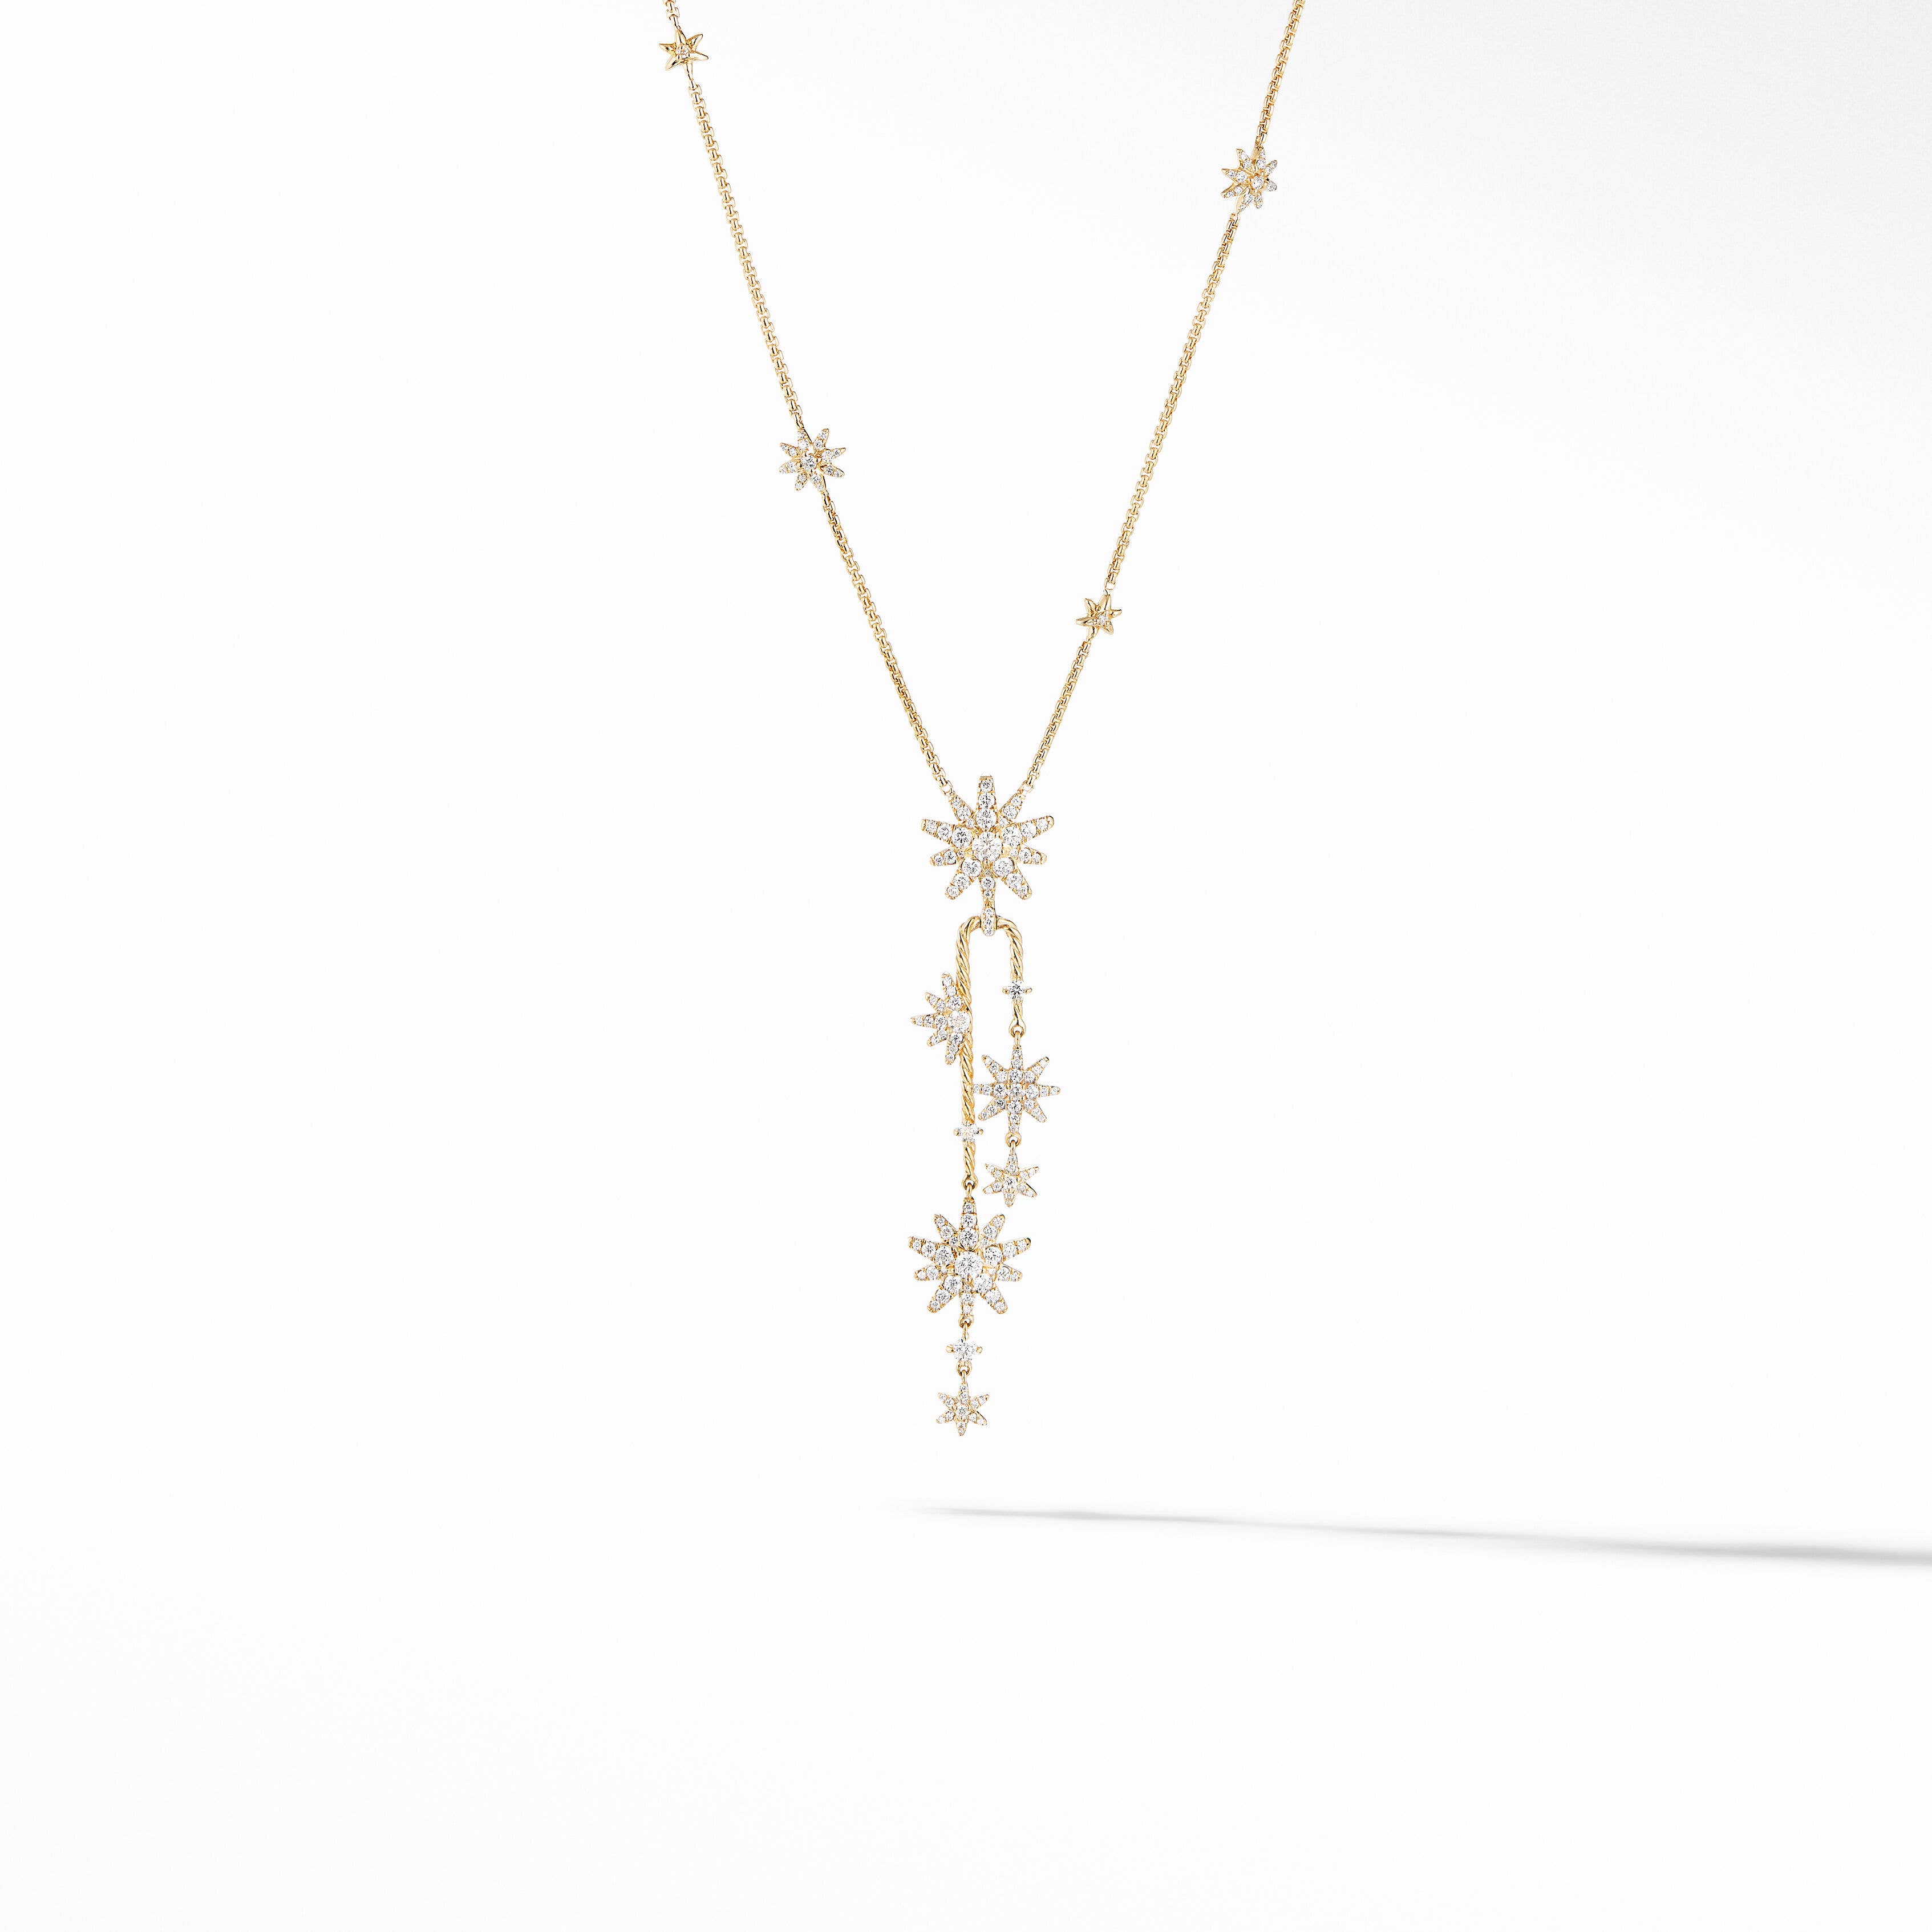 Starburst Cluster Necklace in 18K Yellow Gold with Full Pavé Diamonds